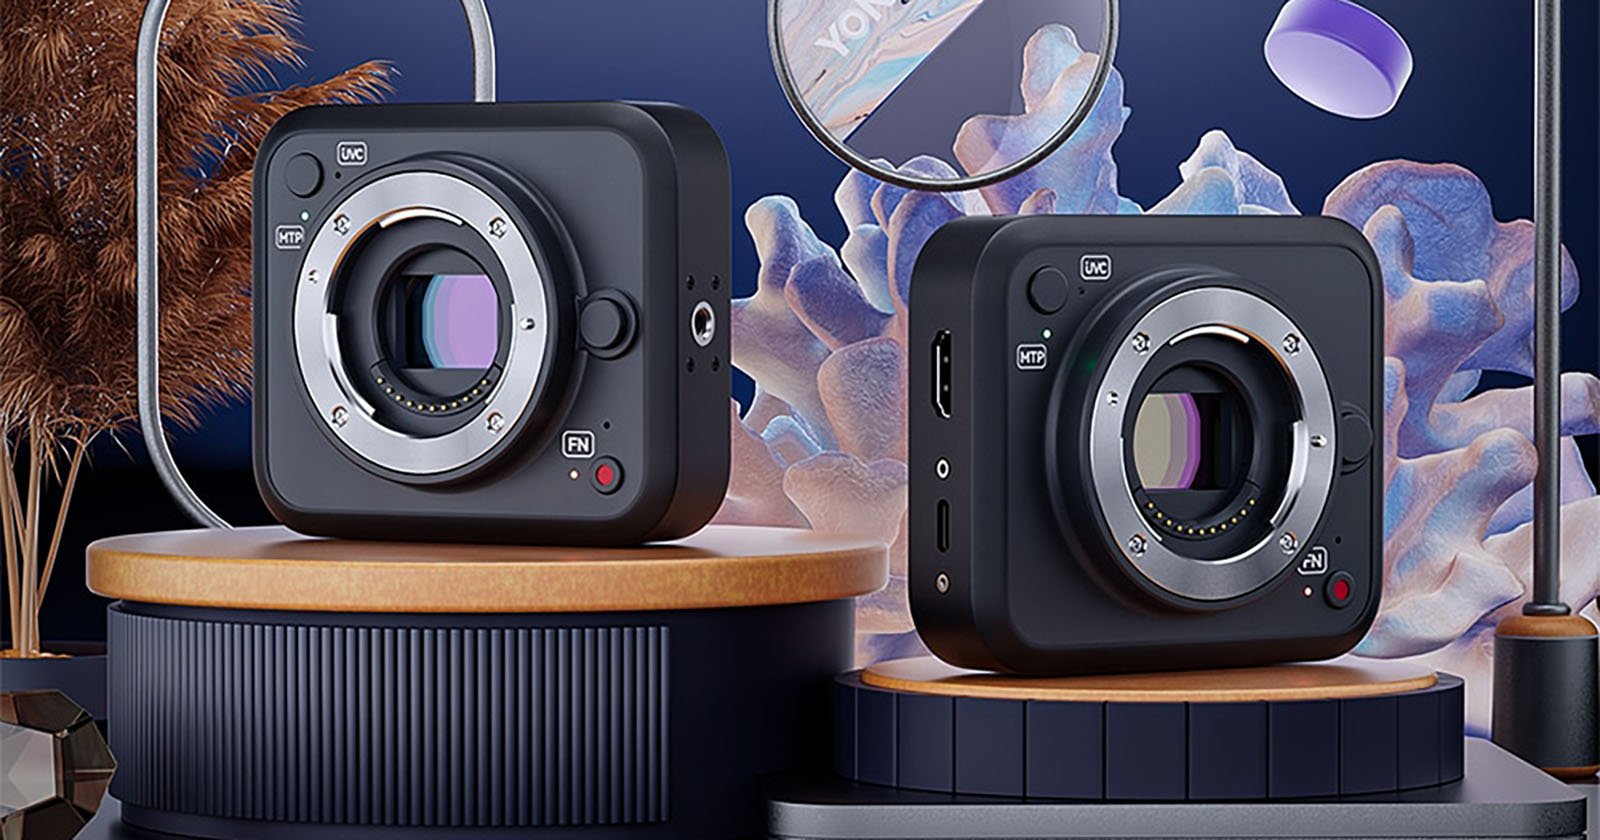 The Yongnuo YN433 is a Micro Four Thirds Camera for Live Streaming